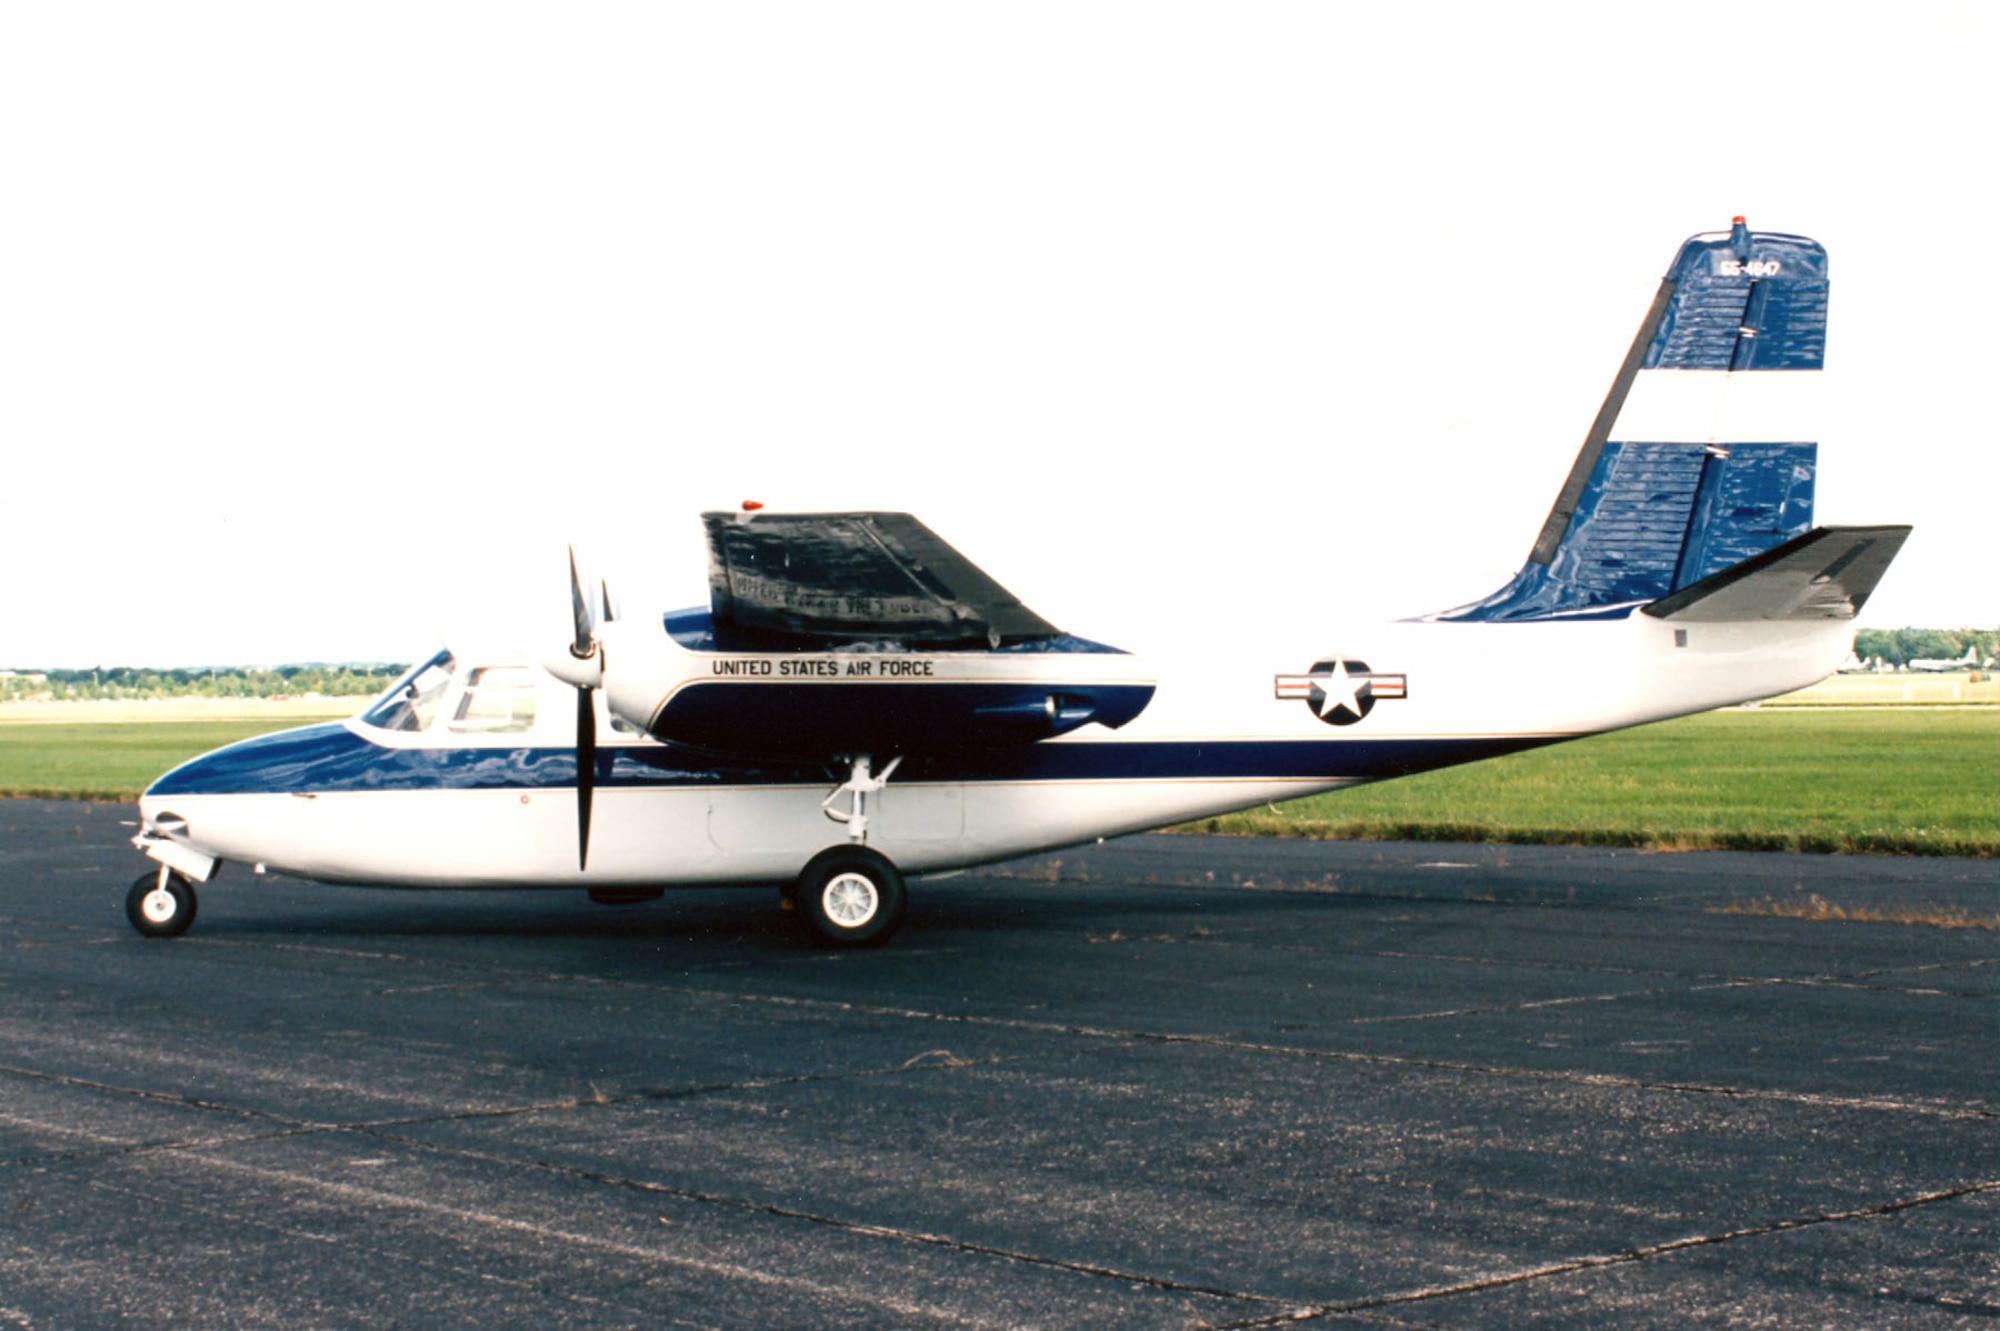 DAYTON, Ohio -- Aero Commander U-4B at the National Museum of the United States Air Force. (U.S. Air Force photo)